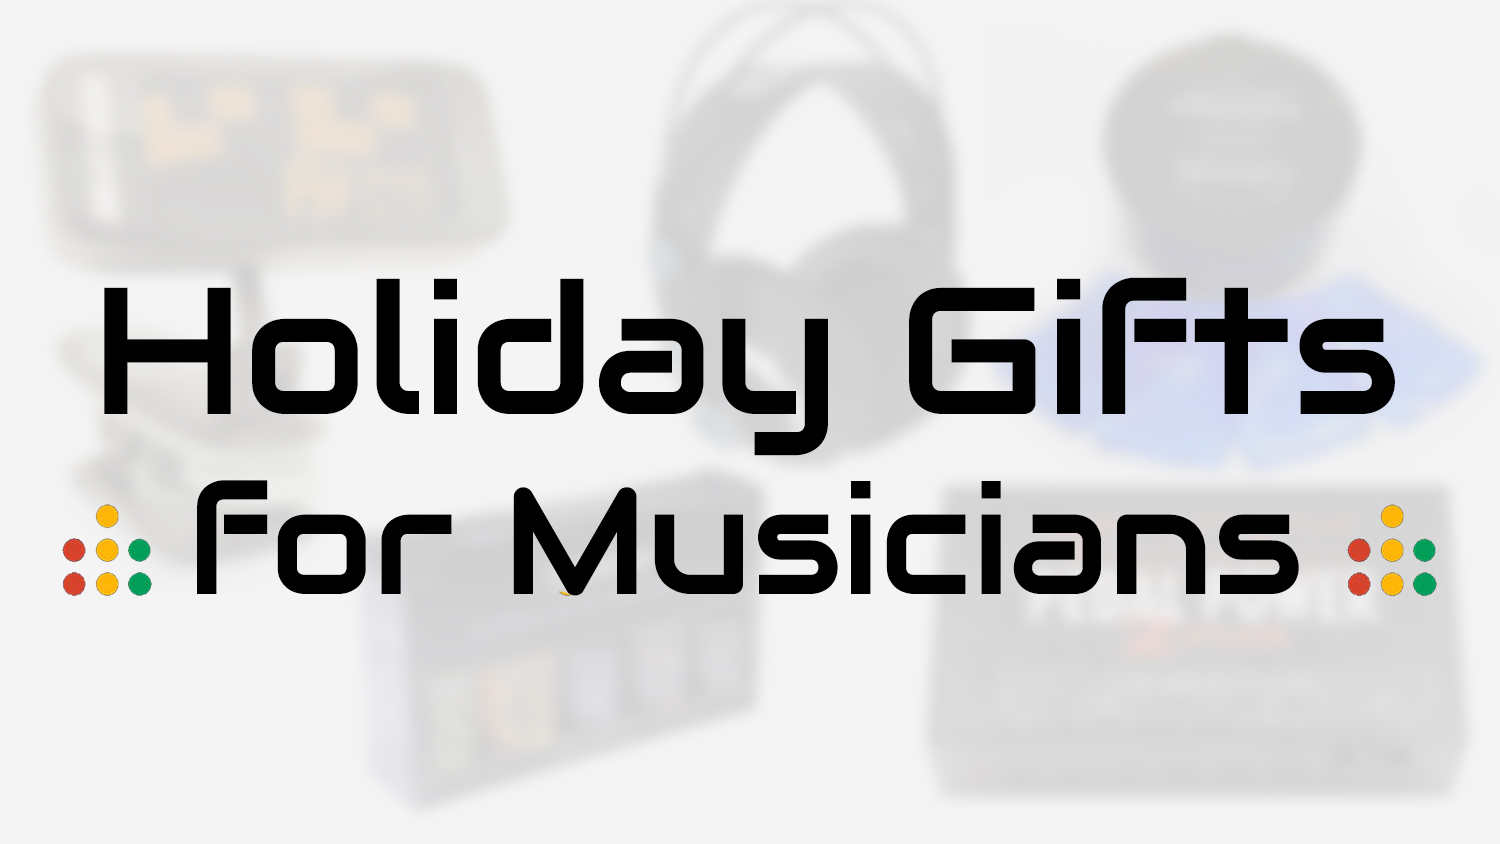 holiday gifts for musicians